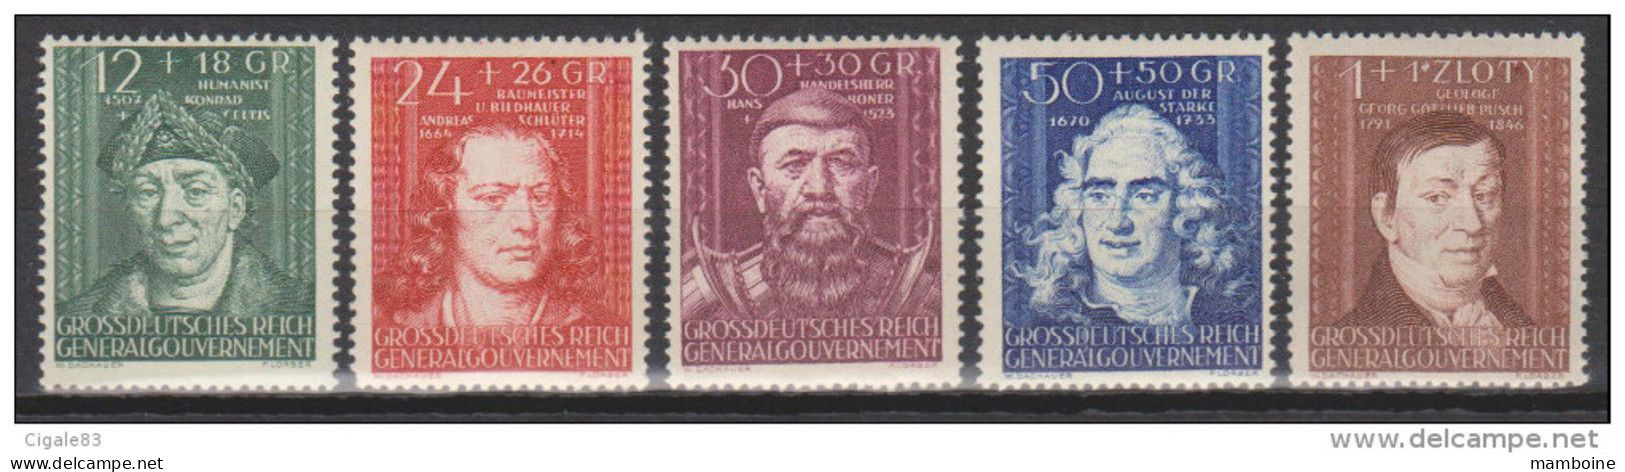 Allemagne ~ Pologne Gouvernement General  1944  N°131/ 35  Neuf X X  5 Valeurs - General Government